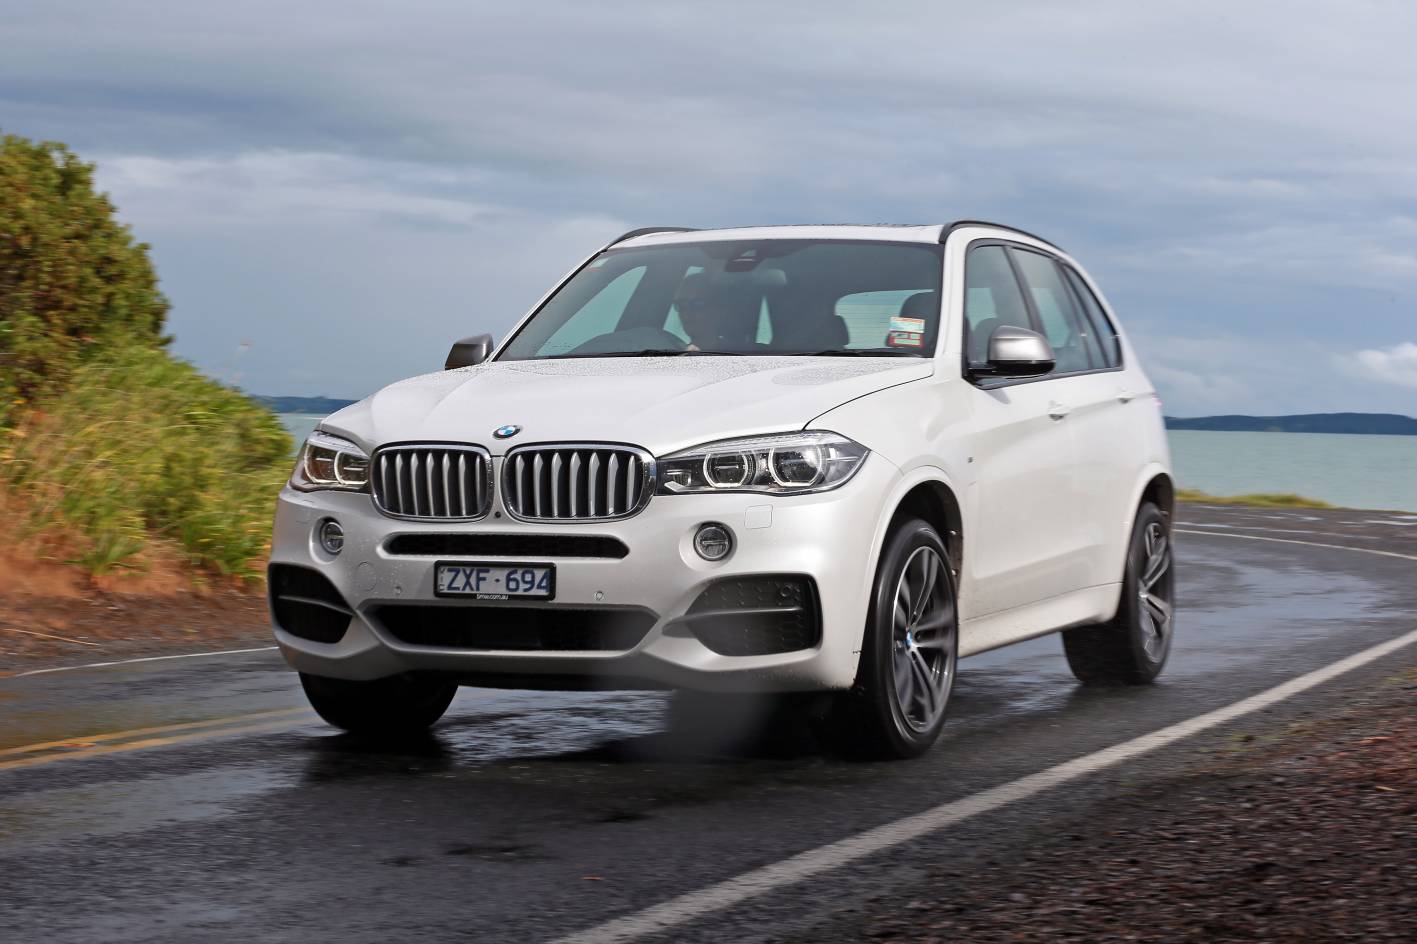 BMW X7 confirmed with US$1 billion plant investment